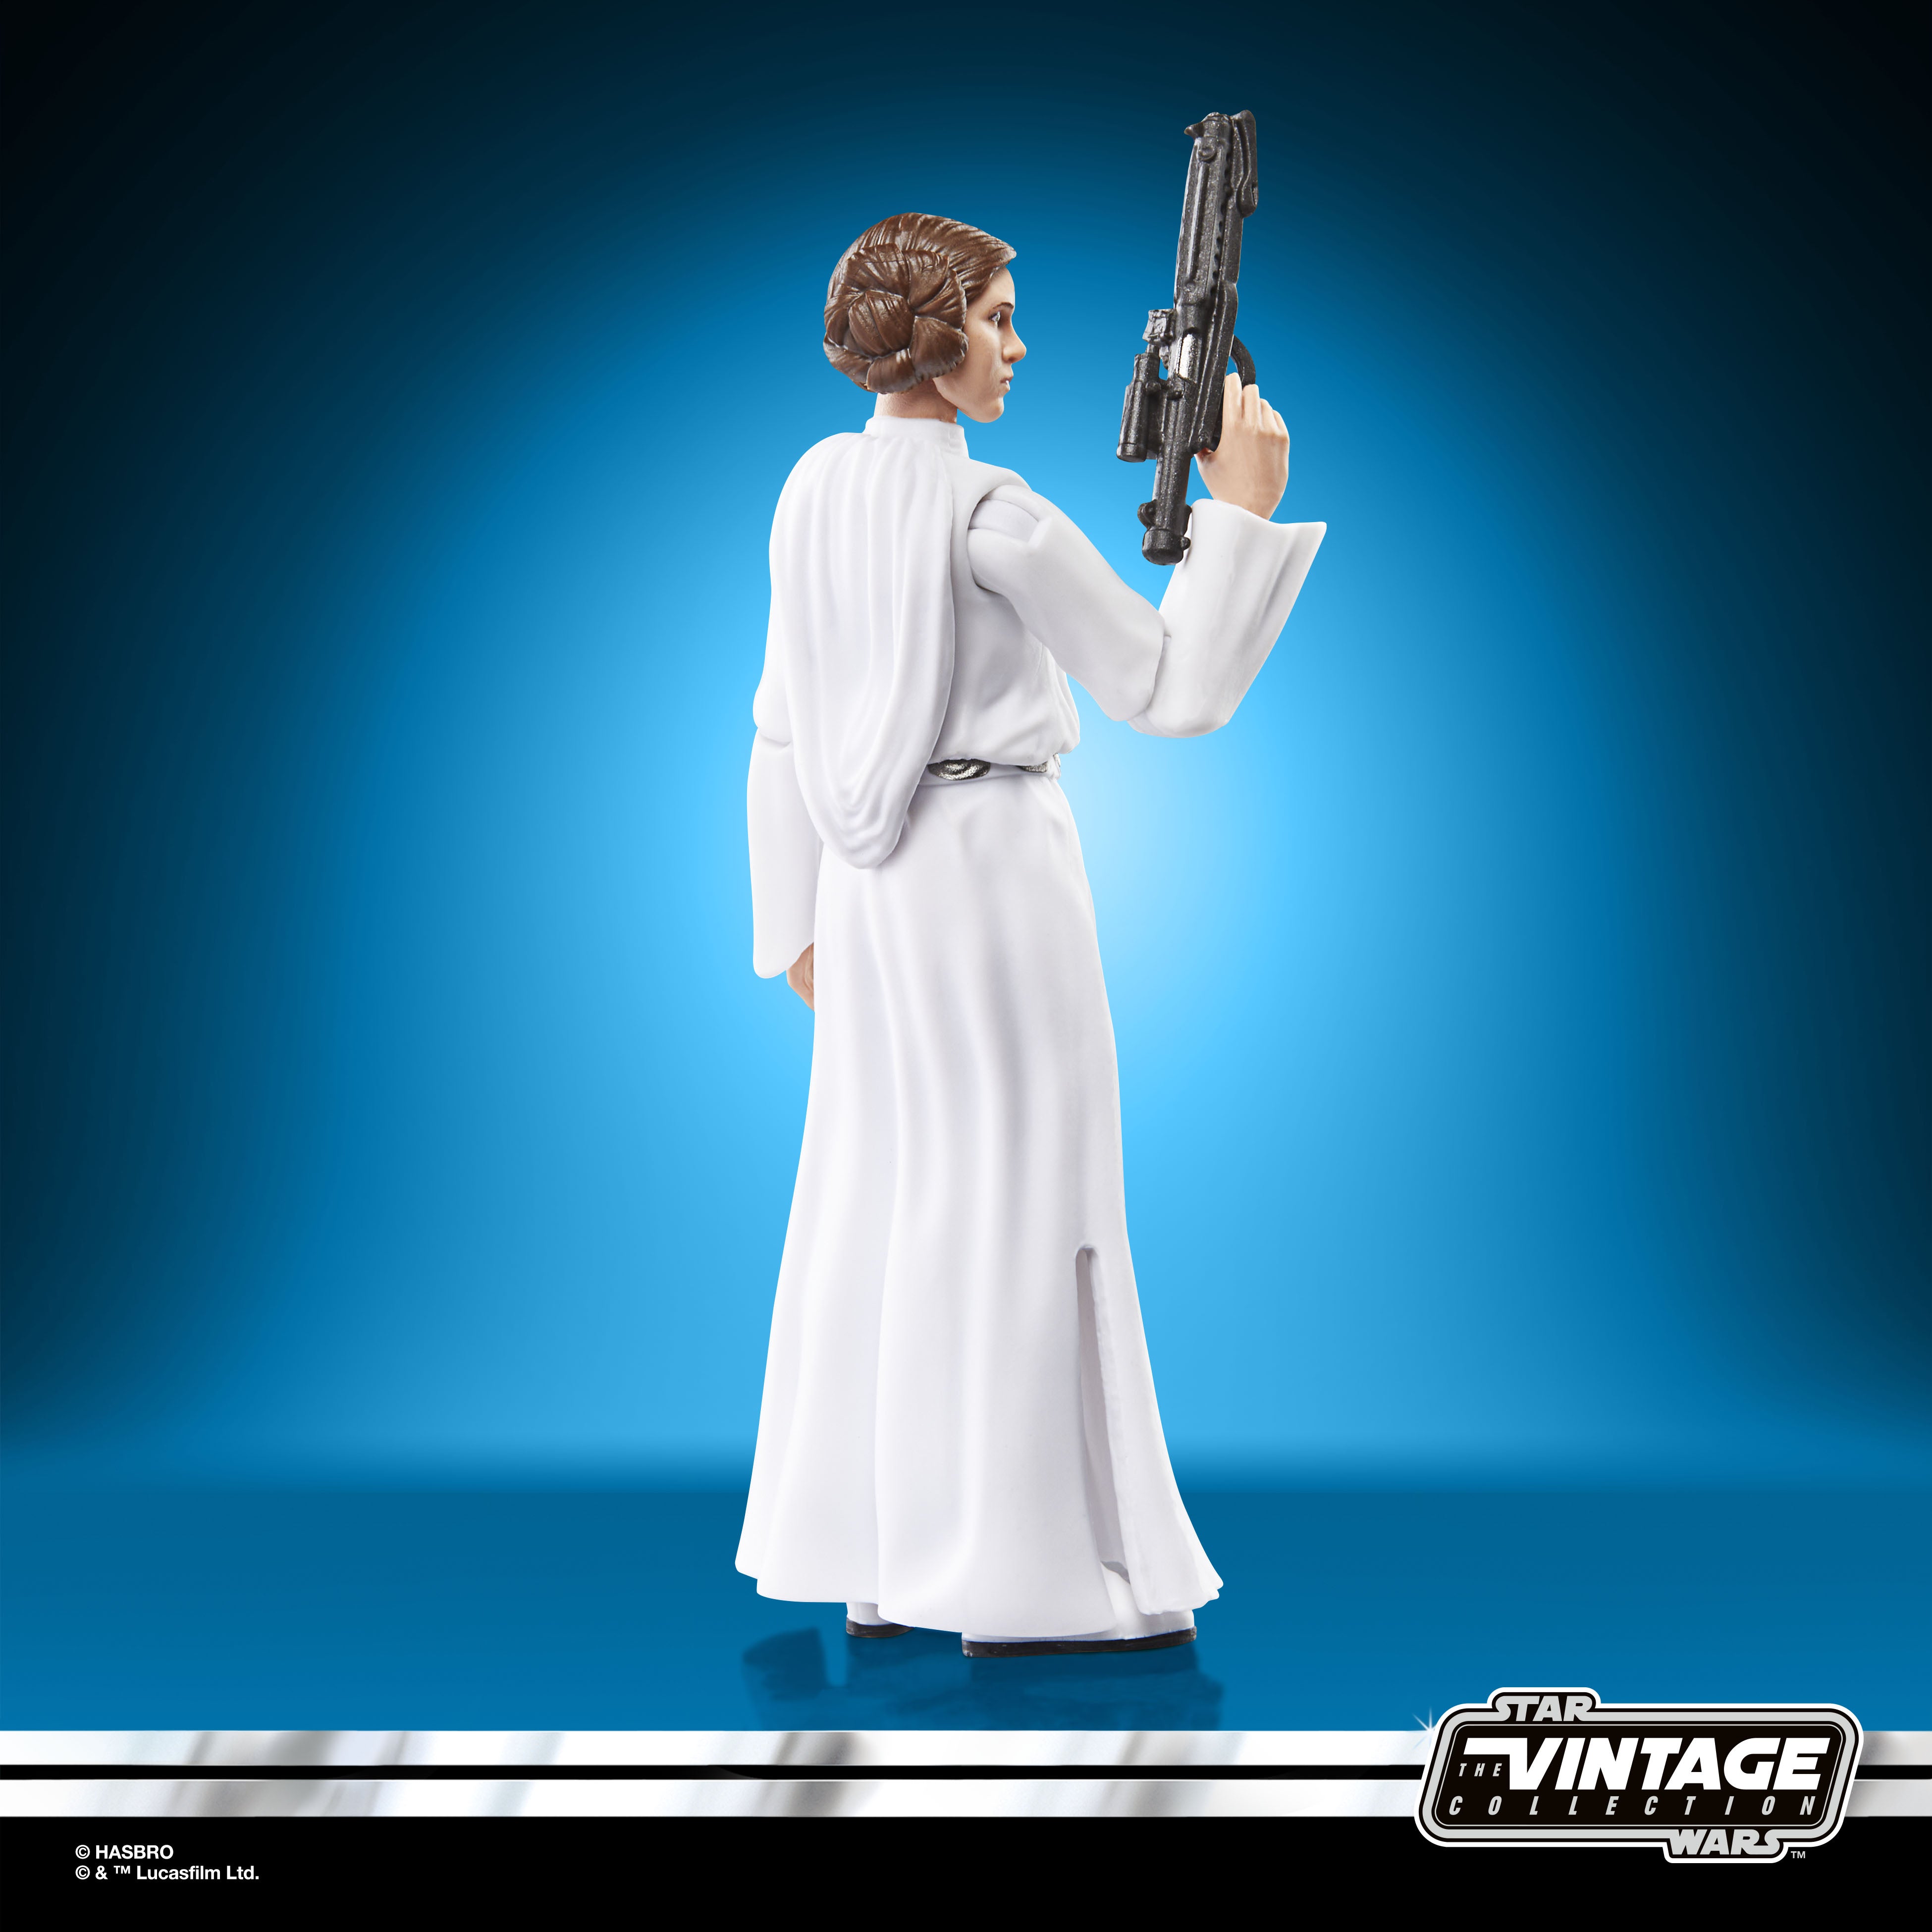 Star Wars The Vintage Collection: A New Hope - Princess Leia Organa